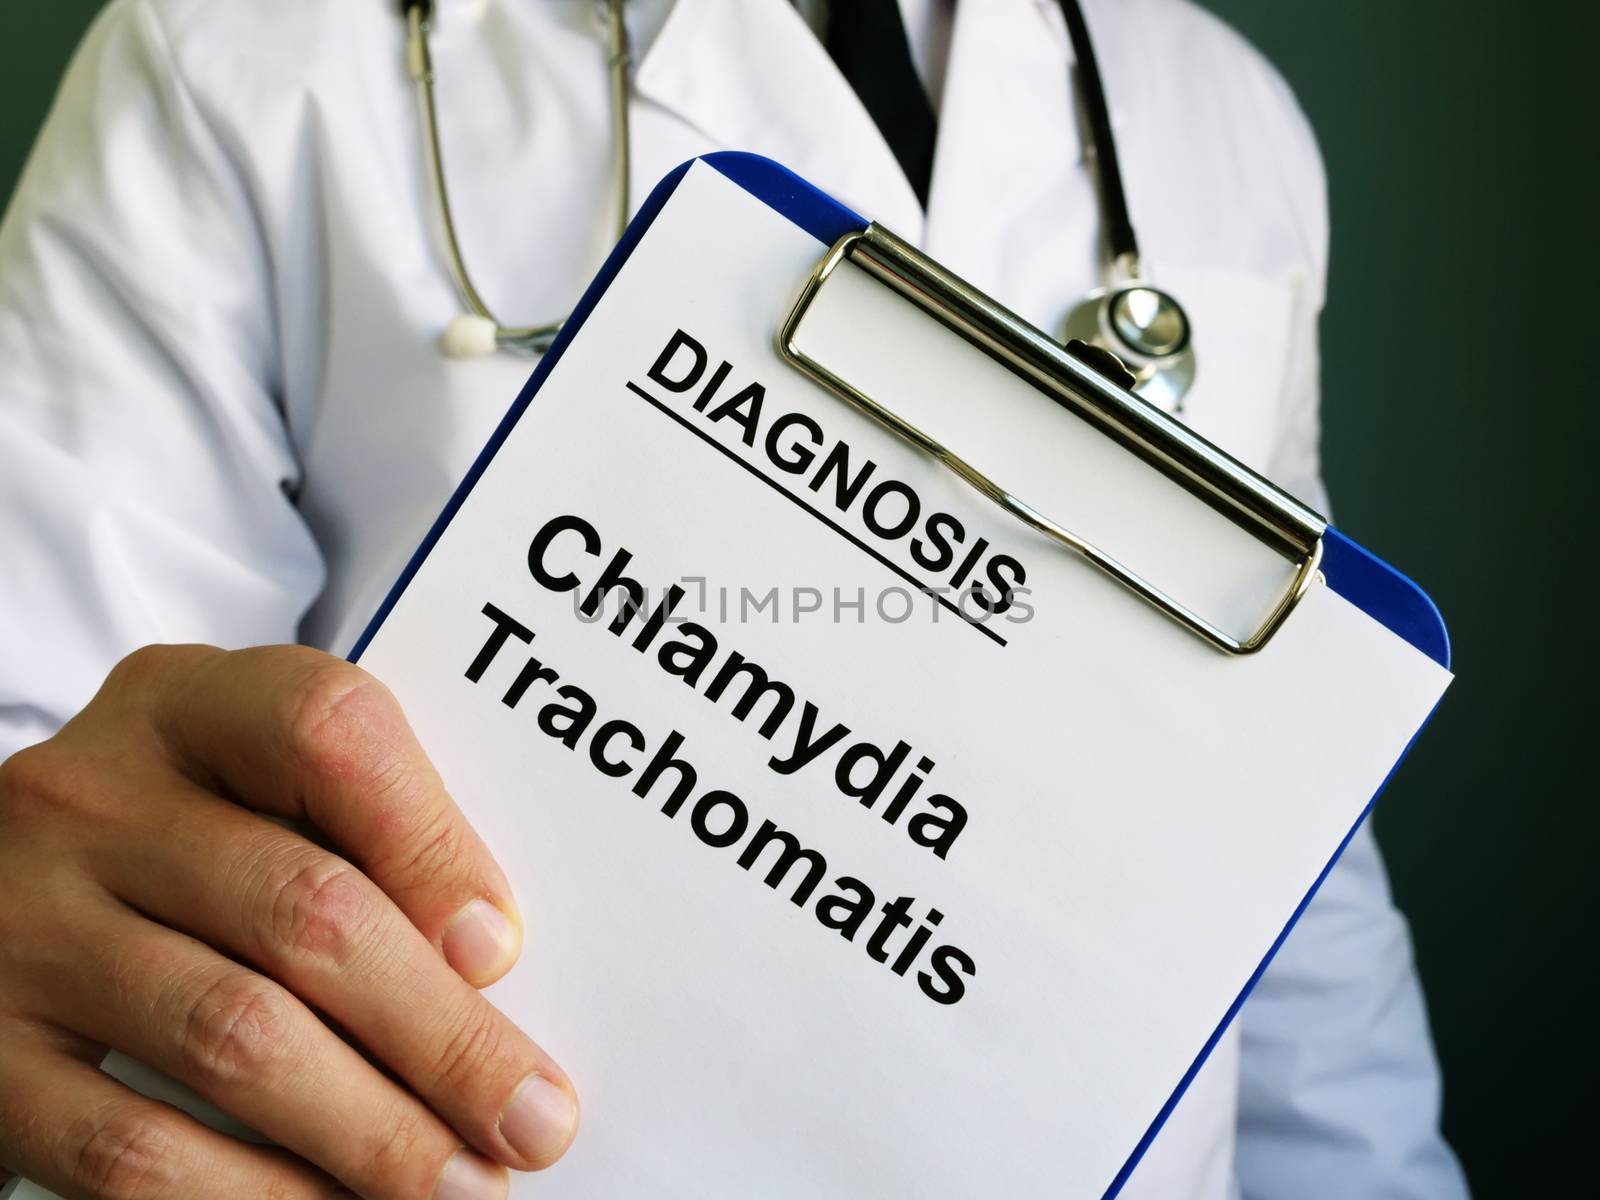 Chlamydia trachomatis diagnosis in the hands of the doctor. by designer491